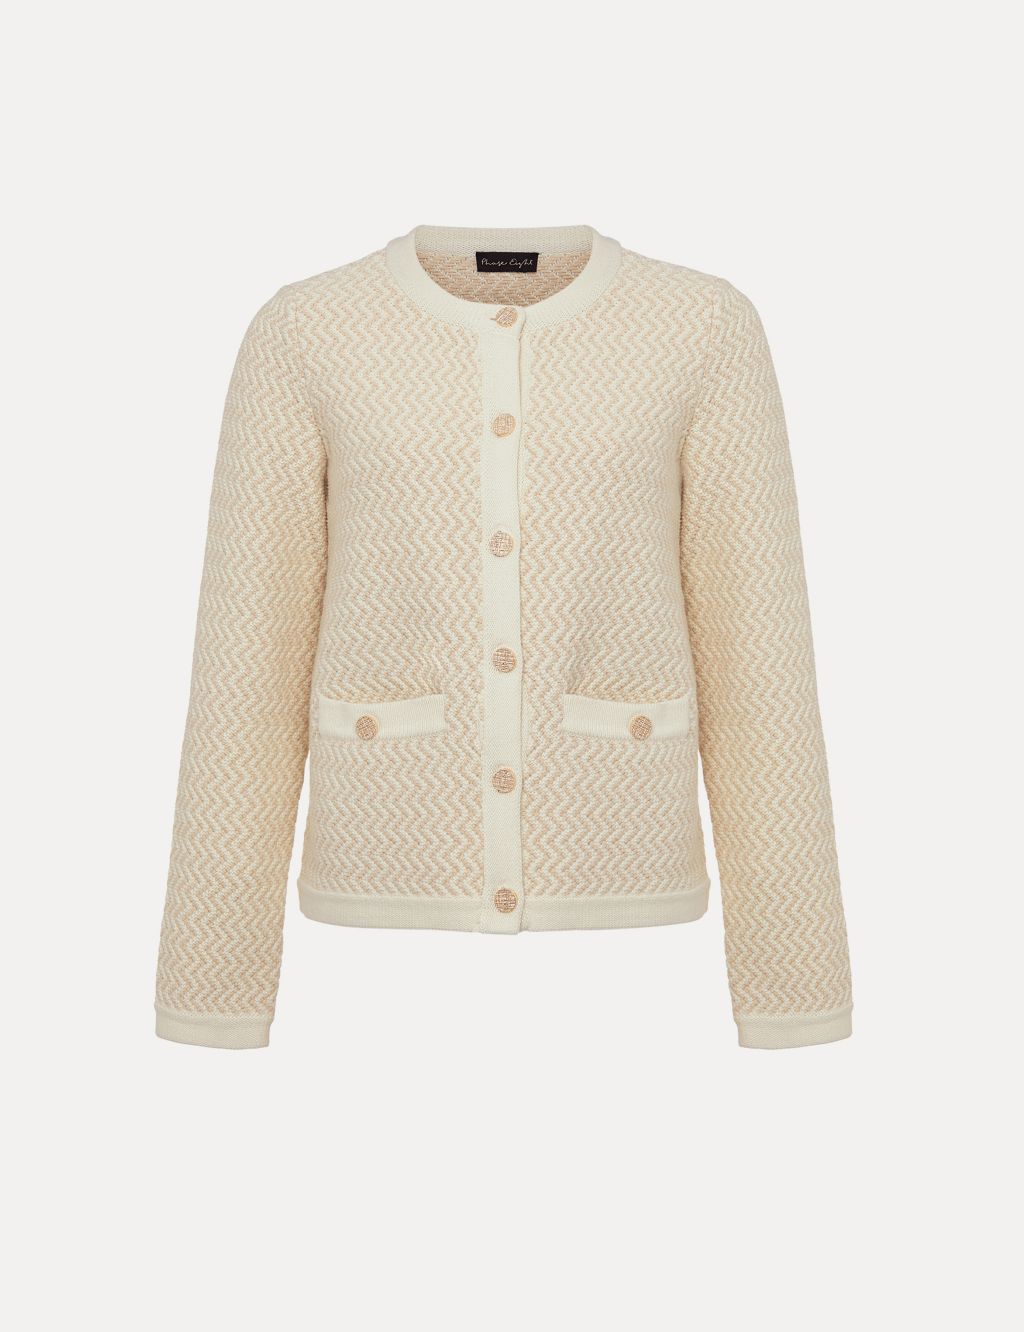 Pure Cotton Textured Cropped Jacket image 2